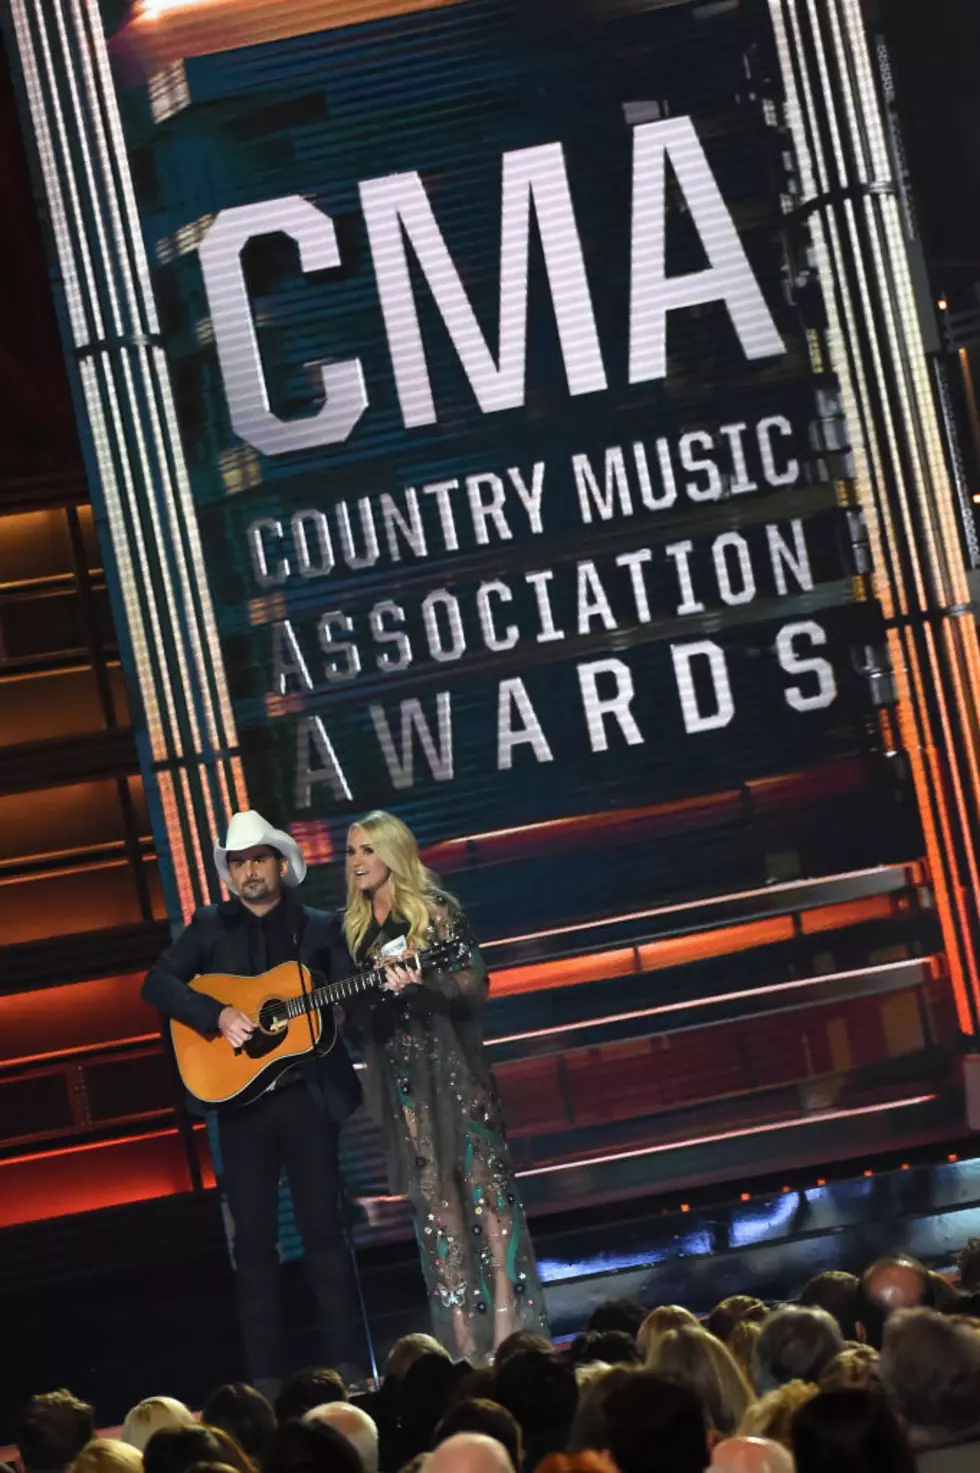 VOTE - Who Will Win the CMA Award for Album of the Year?